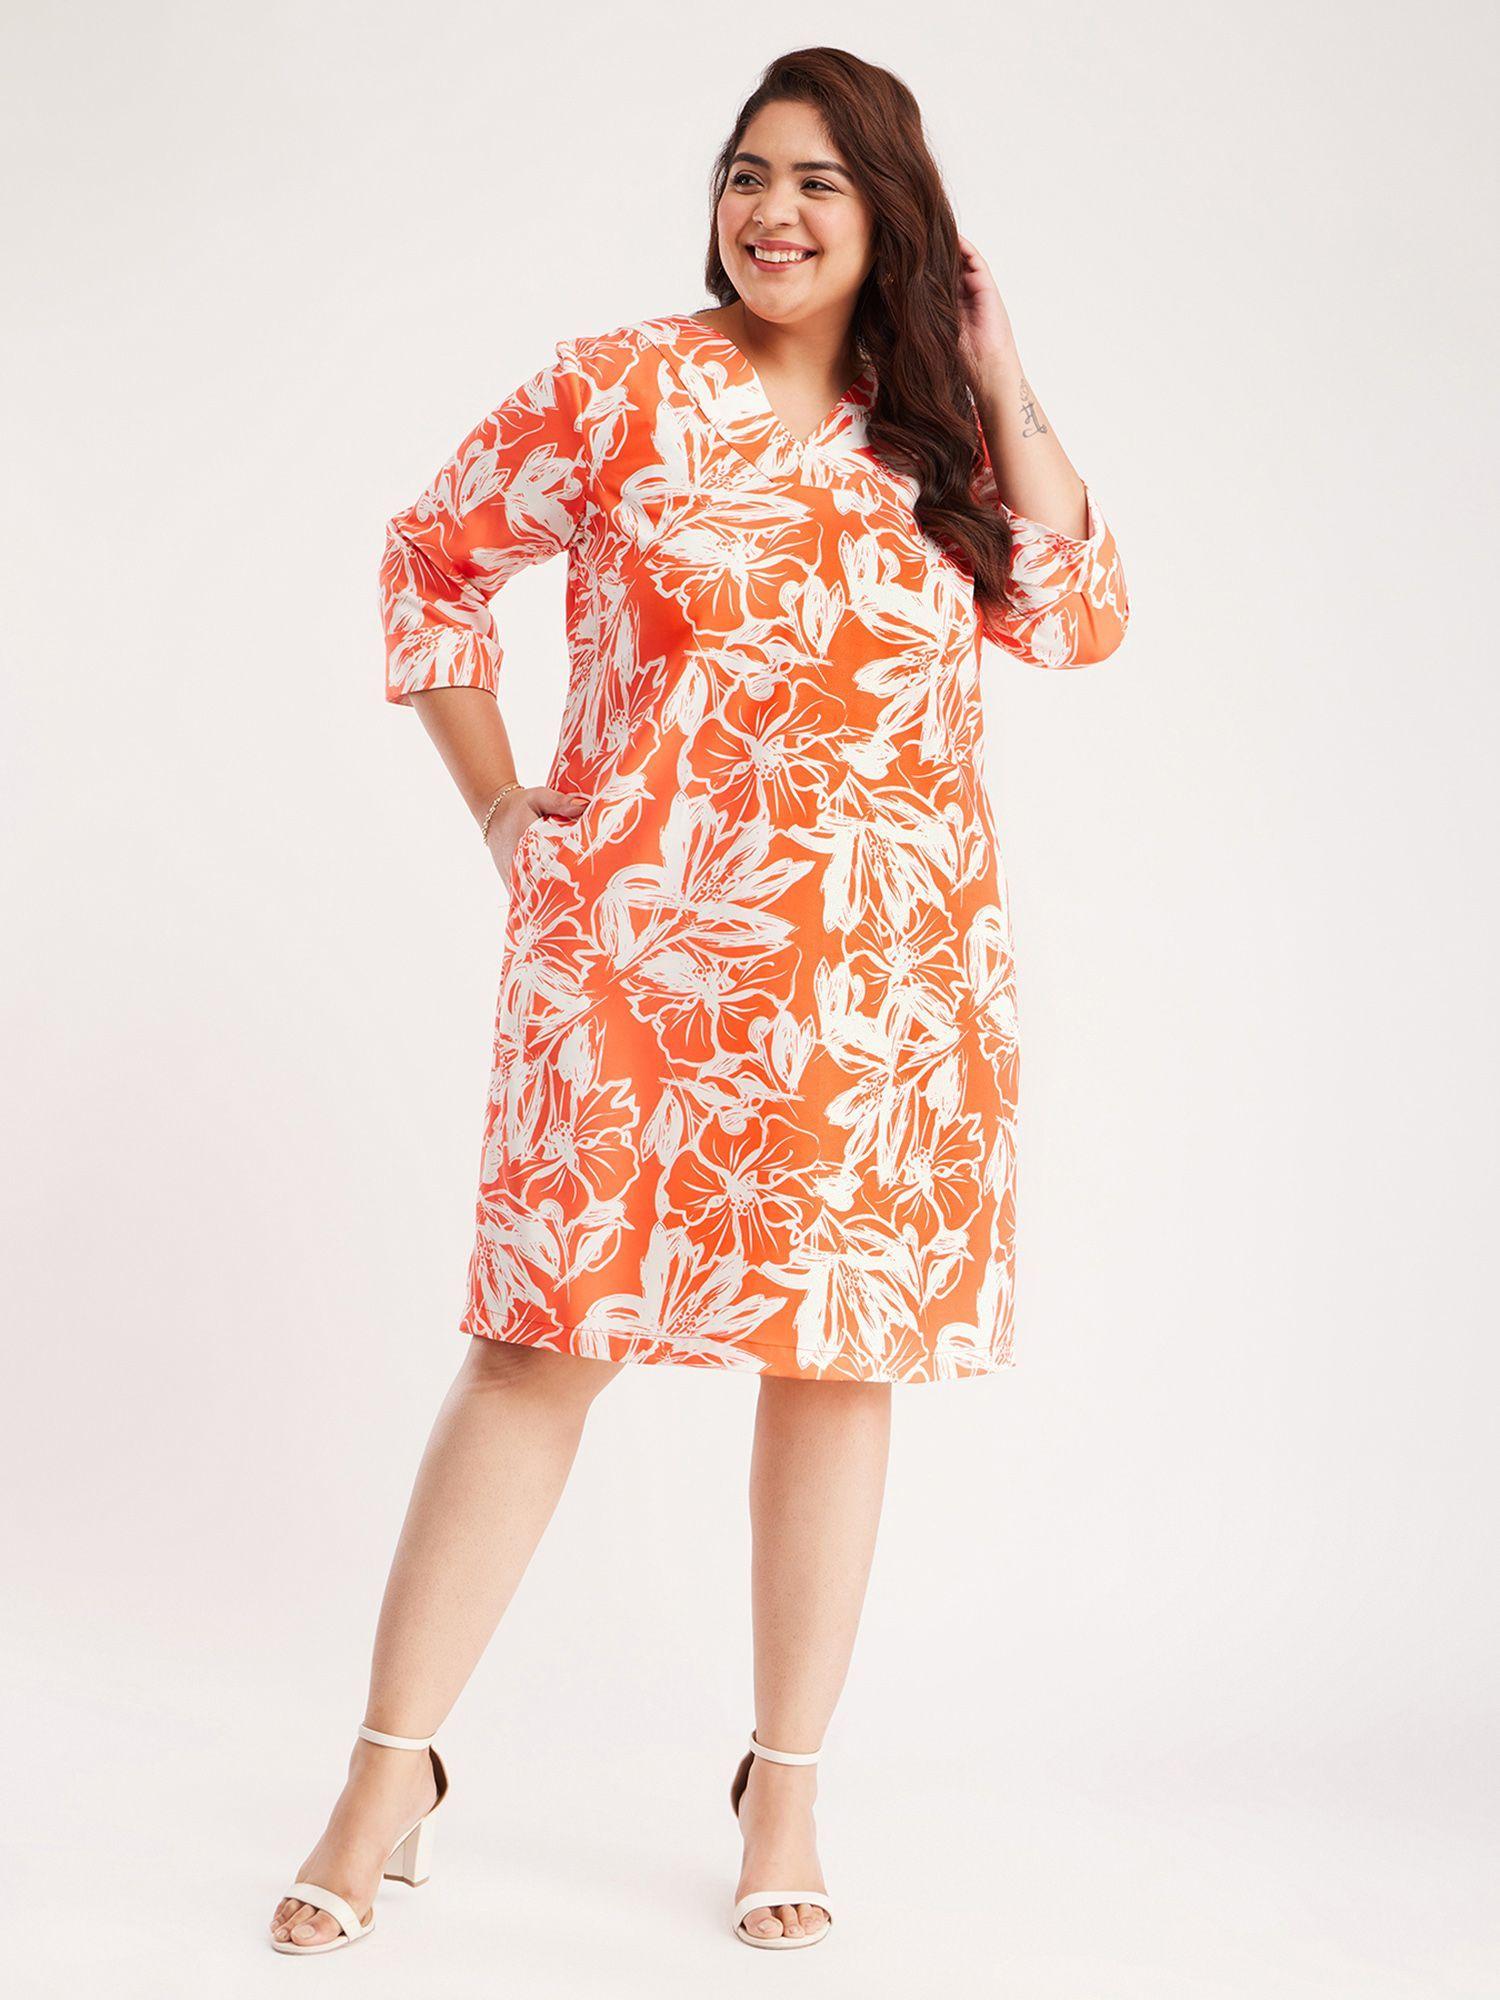 x plus sizefablesstreet x floral print shift dress - coral and off white